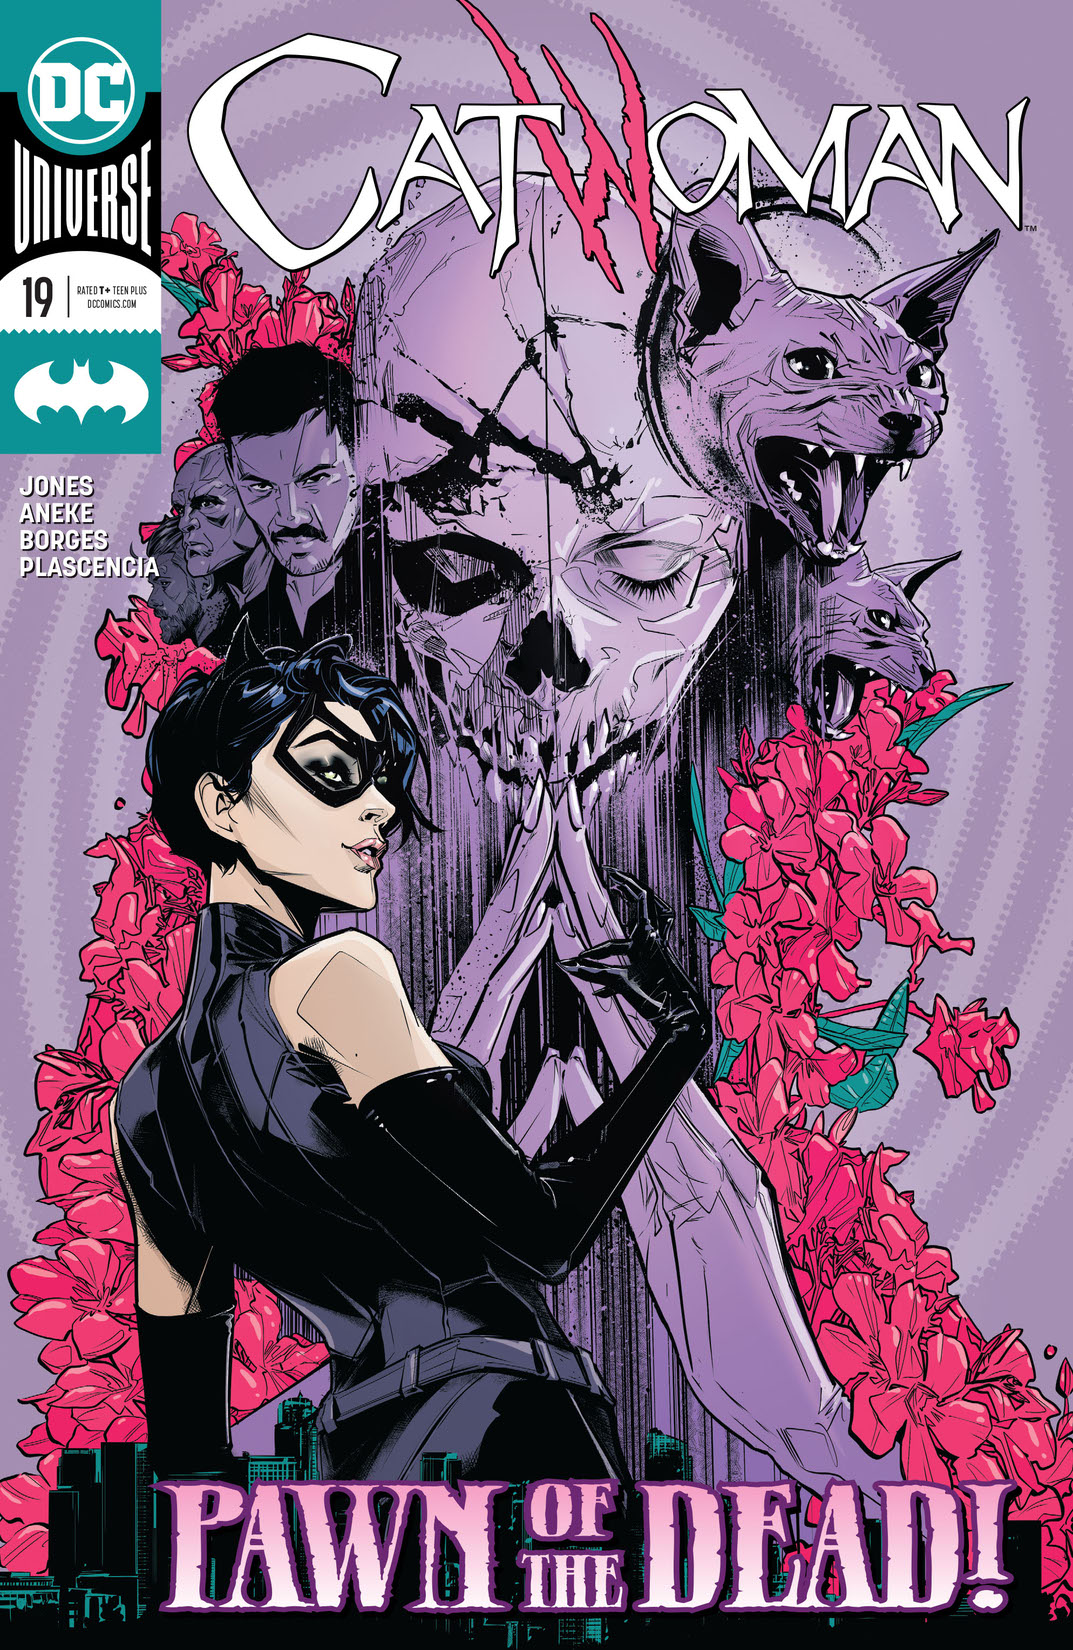 Catwoman (2018-) #19 preview images